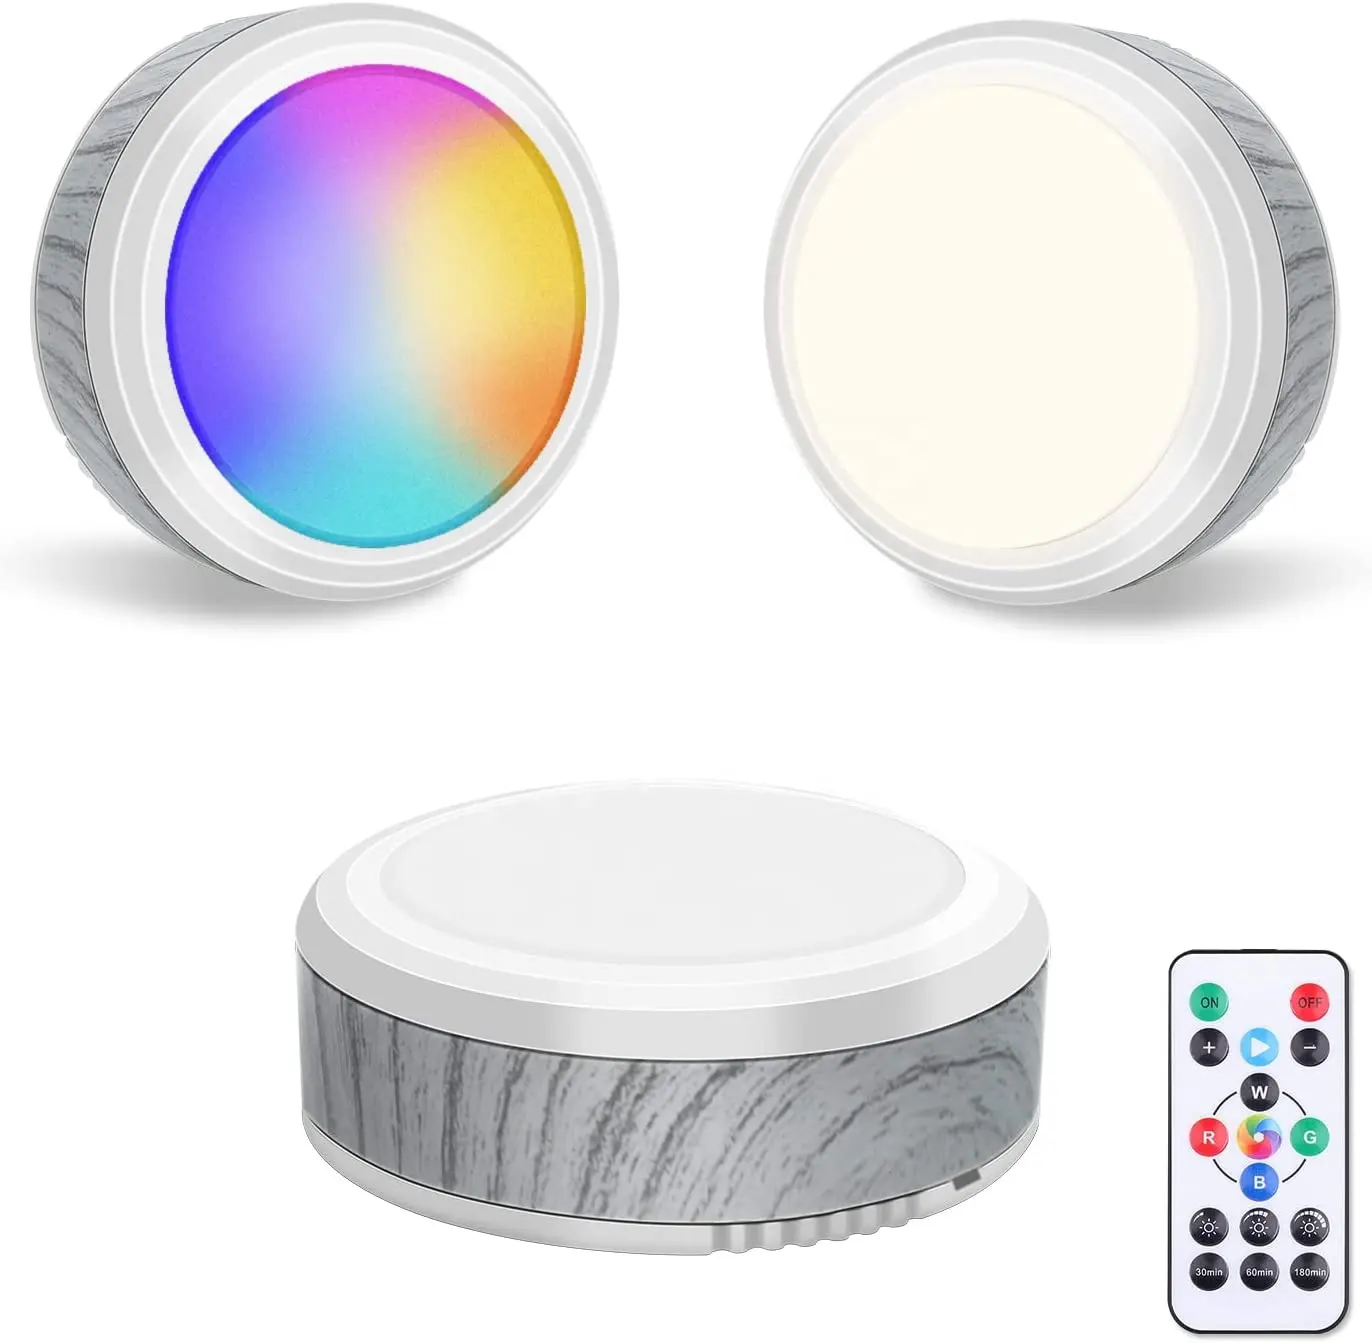 Wholesale Puck Lights Color Changing Wireless LED Puck Lights with Remote Control Battery Operated Under Cabinet Lights Colored